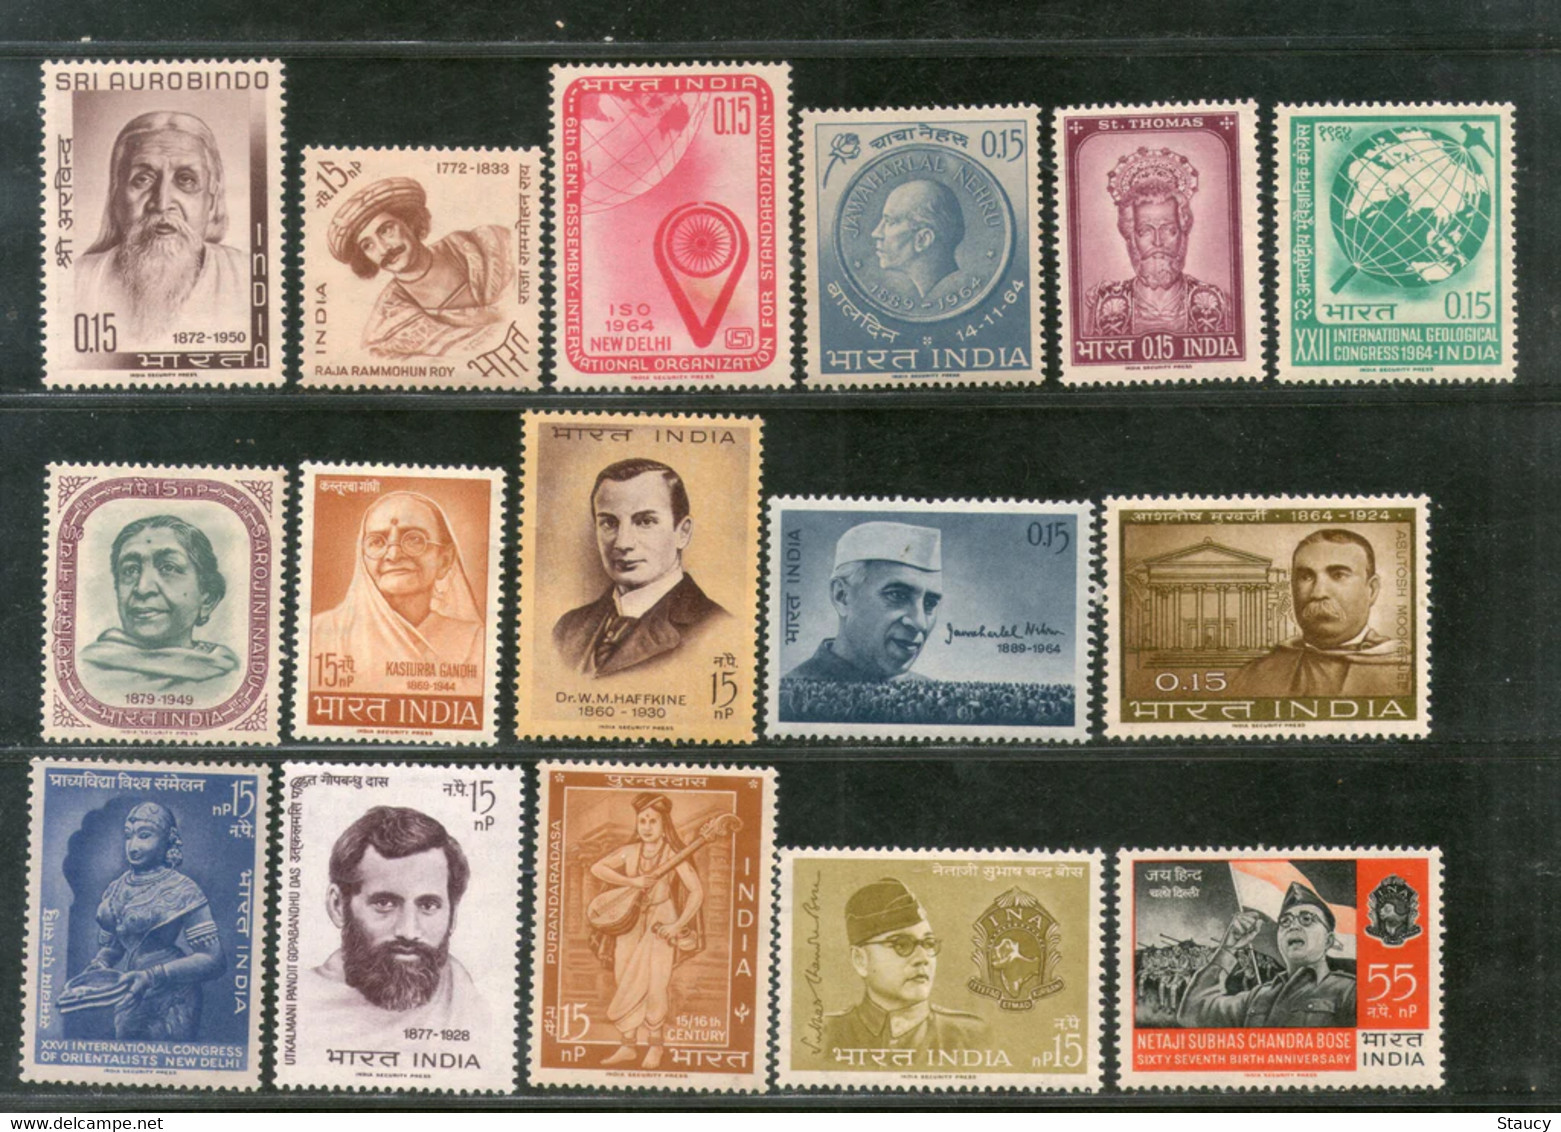 India 1964 Complete Year Pack / Set / Collection Total 16 Stamps (No Missing) MNH As Per Scan - Ongebruikt